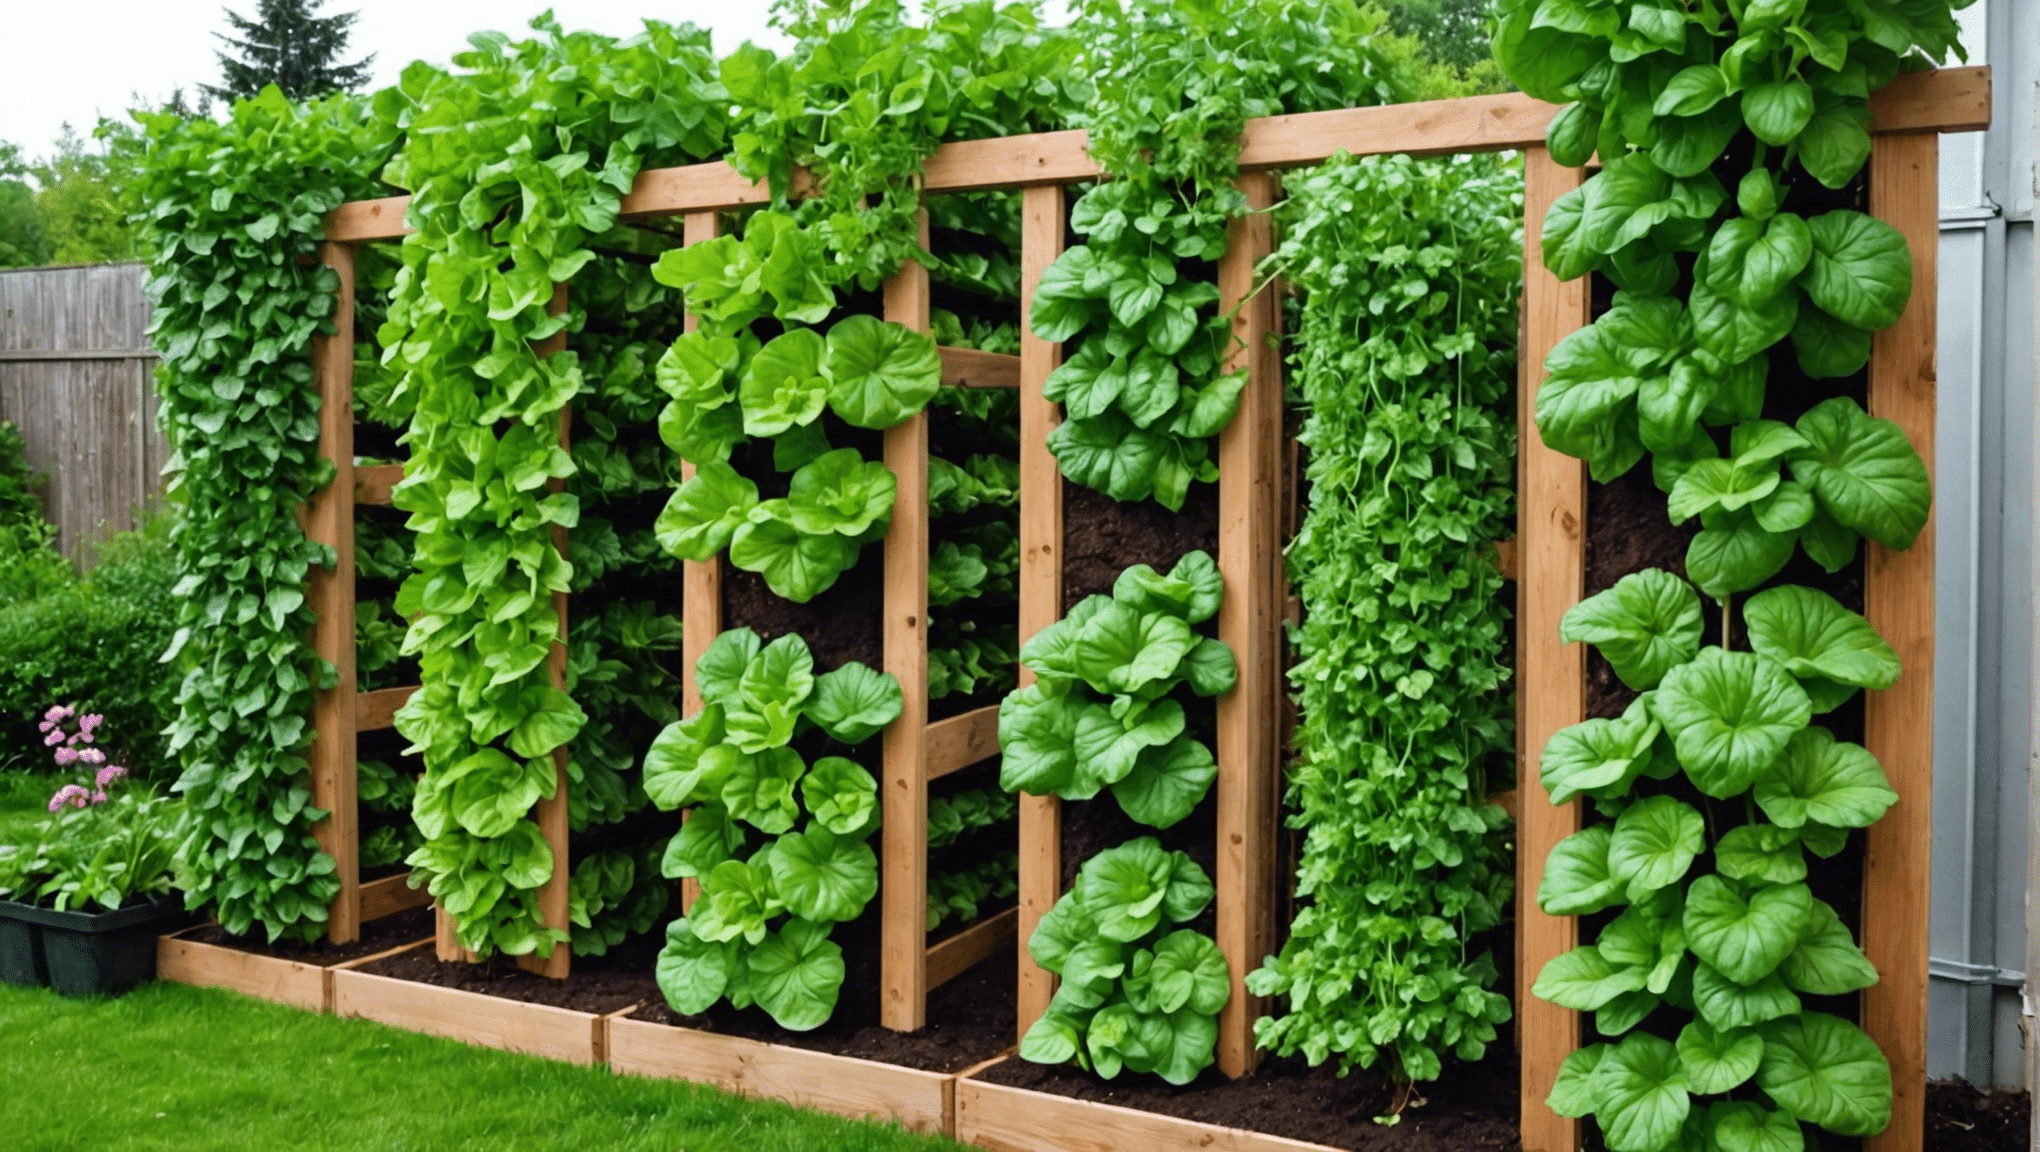 discover innovative and practical vertical vegetable gardening ideas to maximize your space and create a stunning garden.